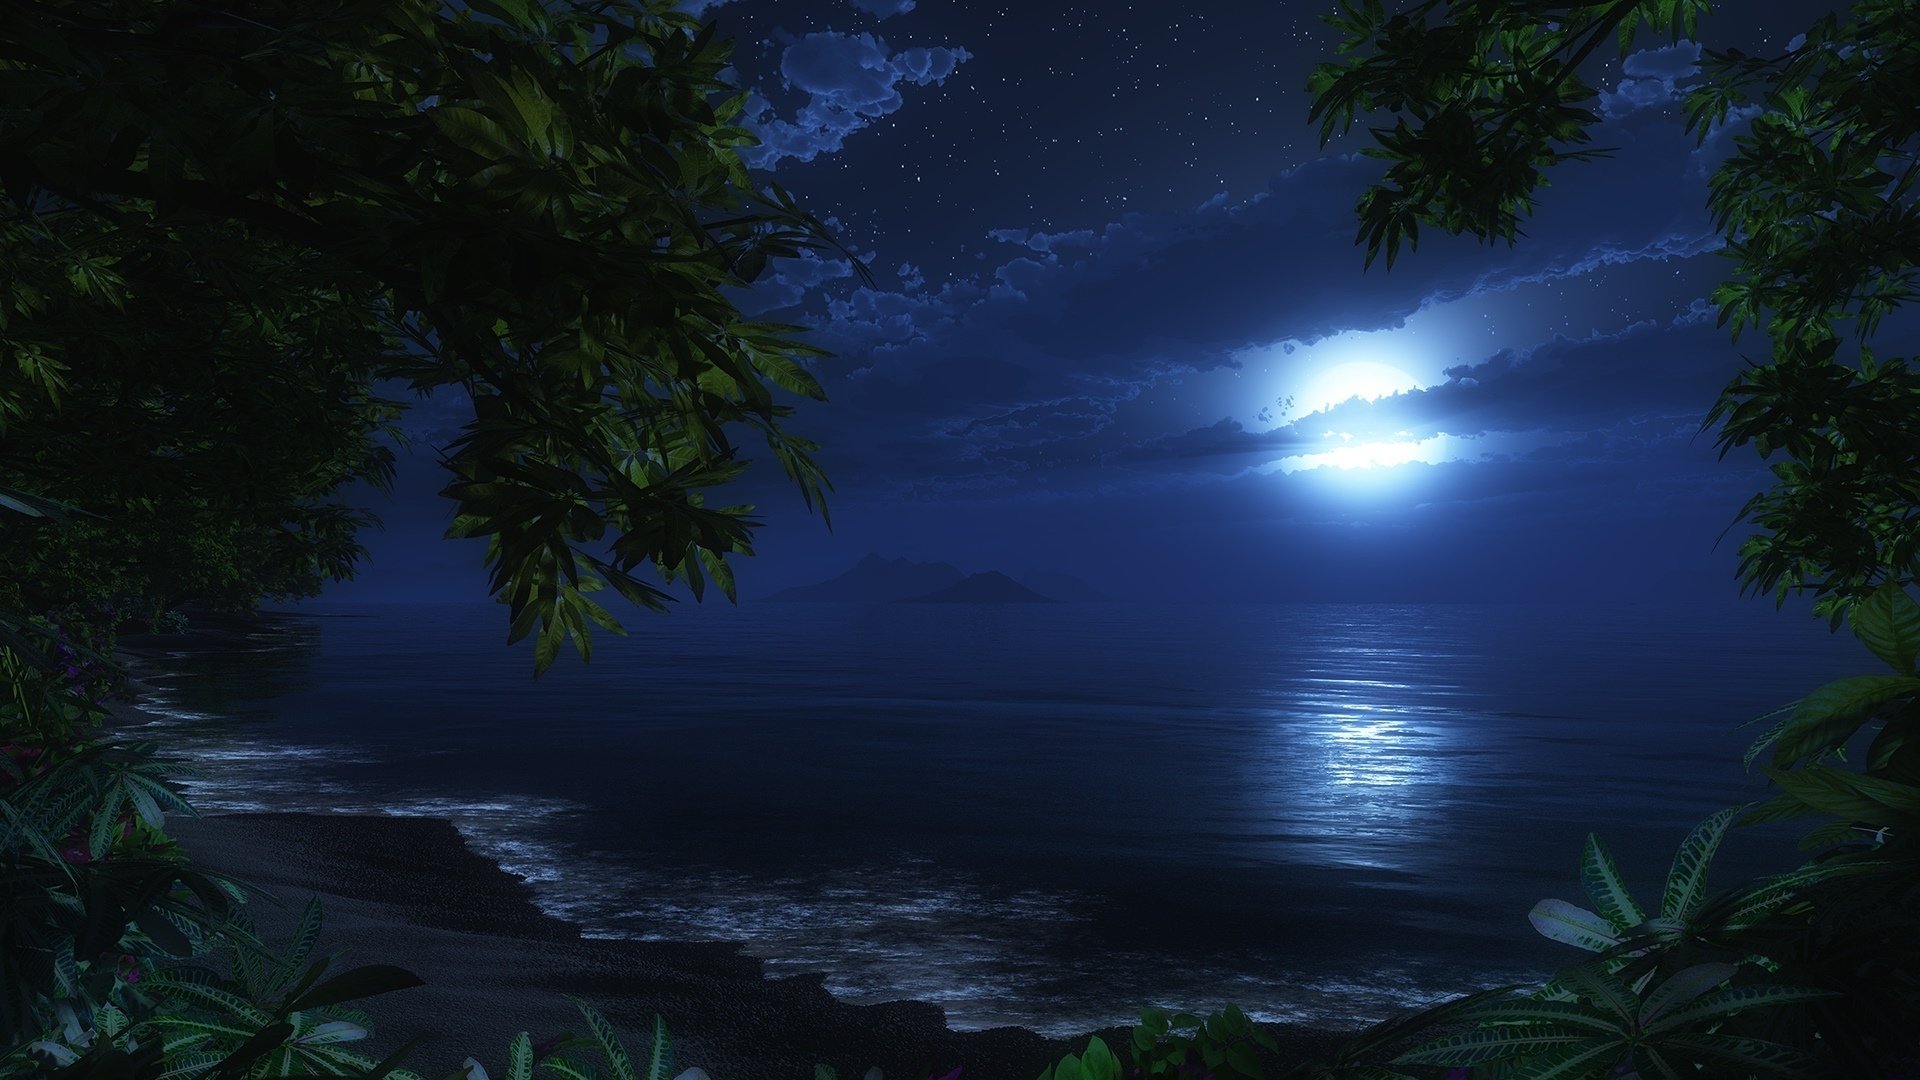 moonlight wallpapers, photos and desktop backgrounds up to 8K